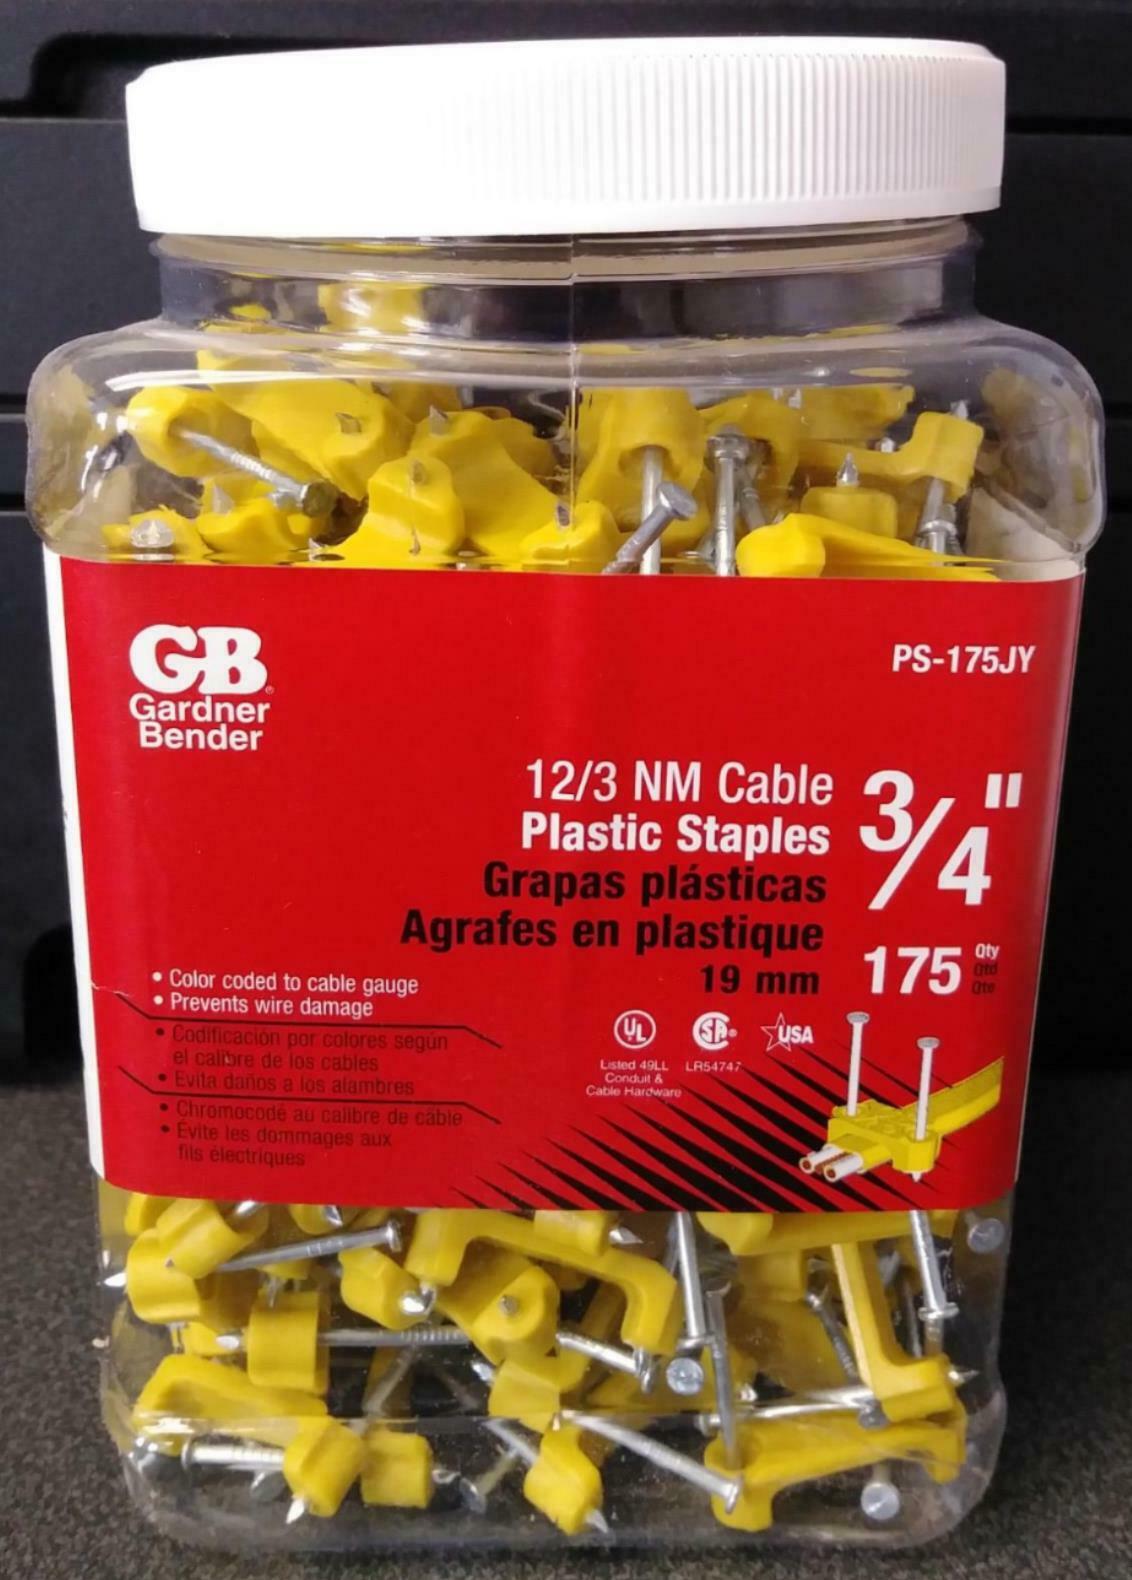 Gardner Bender PS-175JY 3/4" 12/3 NM Cable Yellow Plastic Staples 175 Pack USA